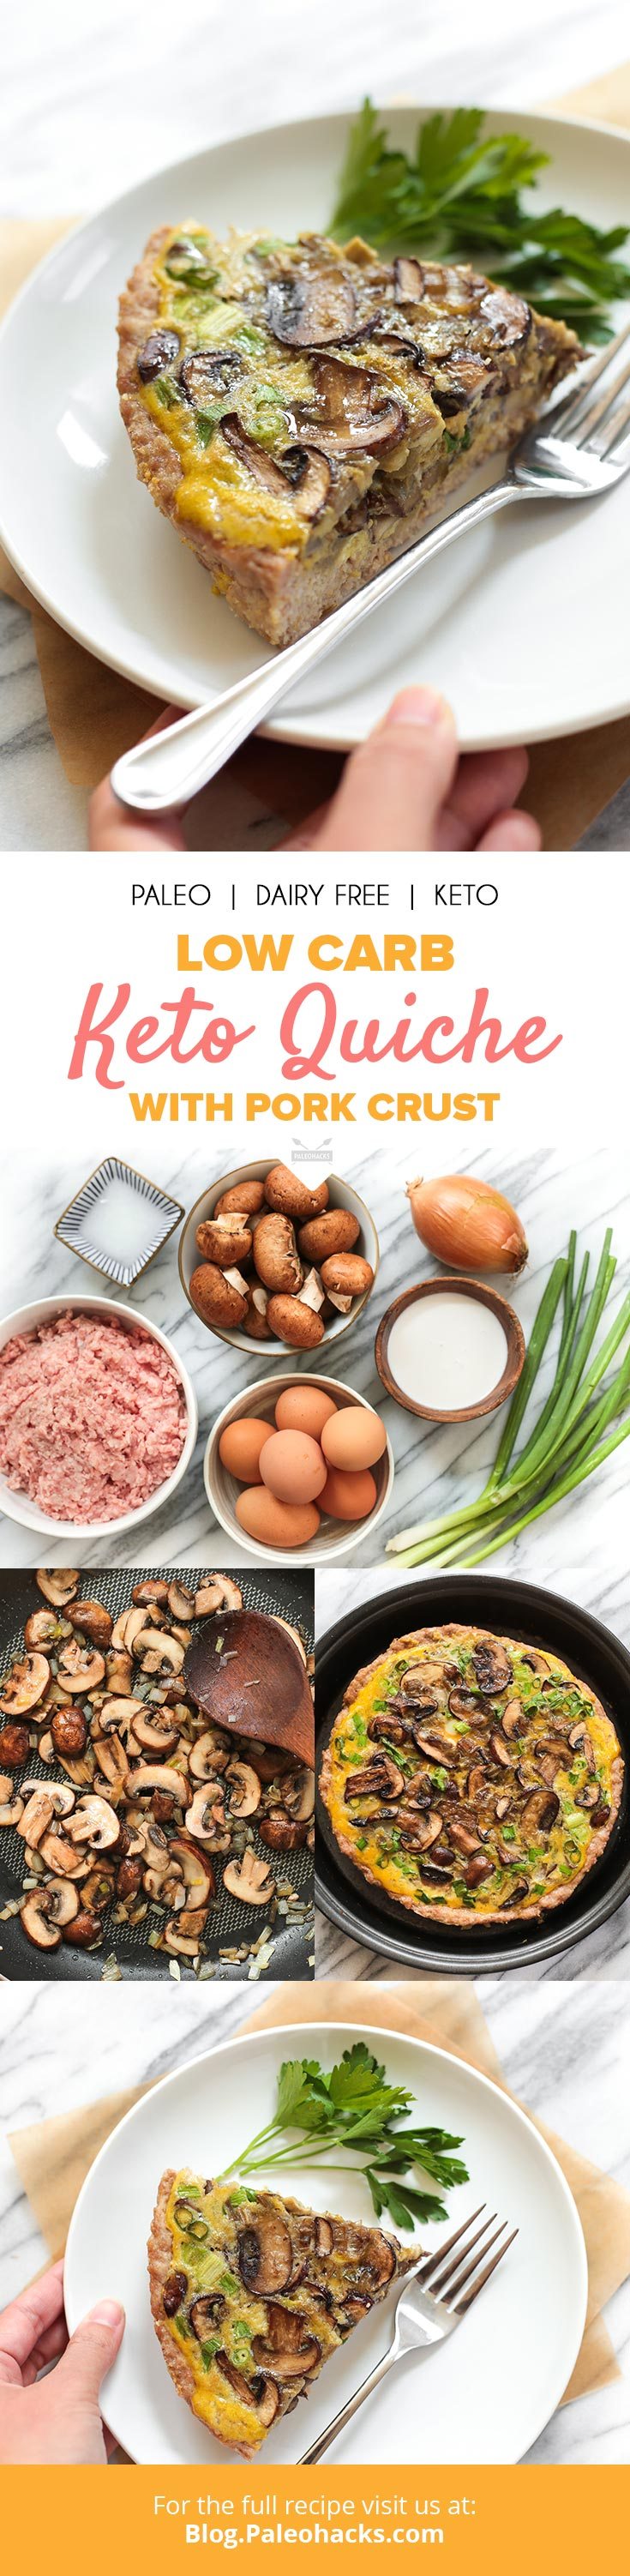 Indulge in a low-carb keto quiche with a crust made entirely out of minced meat! Minced pork and coconut flour combine to make a crust bursting with savory flavor.